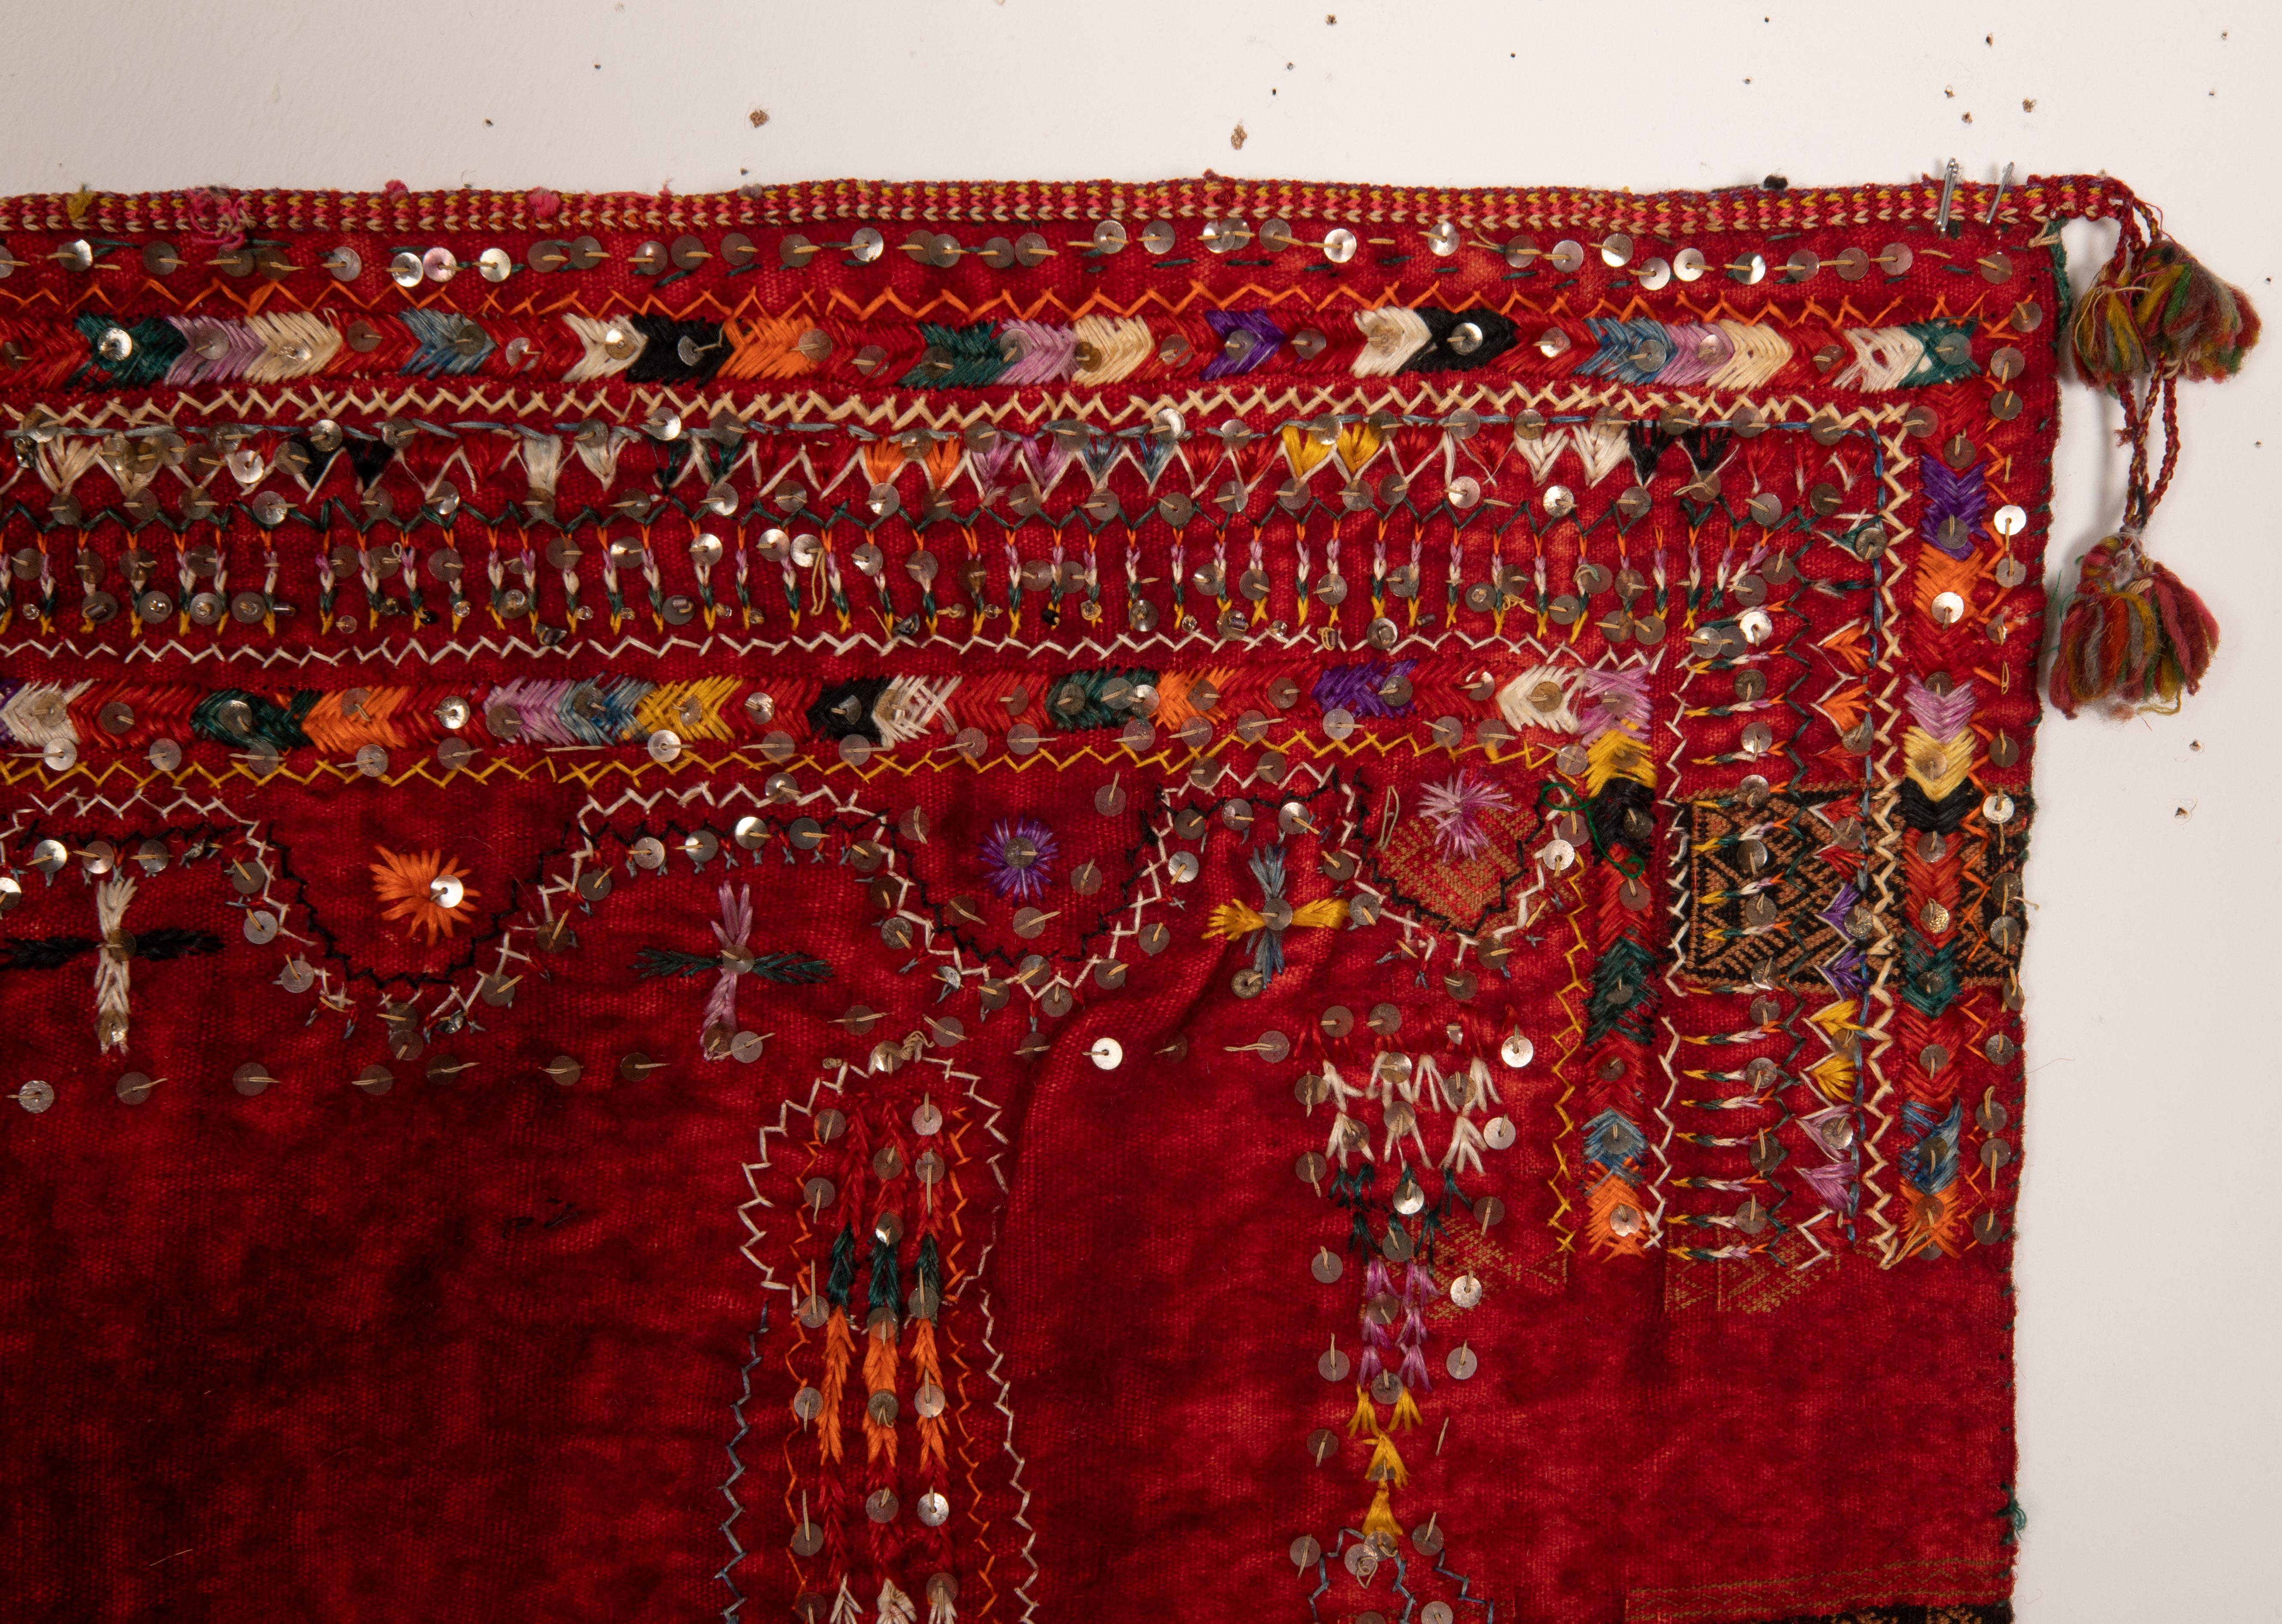 Embroidered Tunisian Wool Wedding Shawl, Early 20th C. For Sale